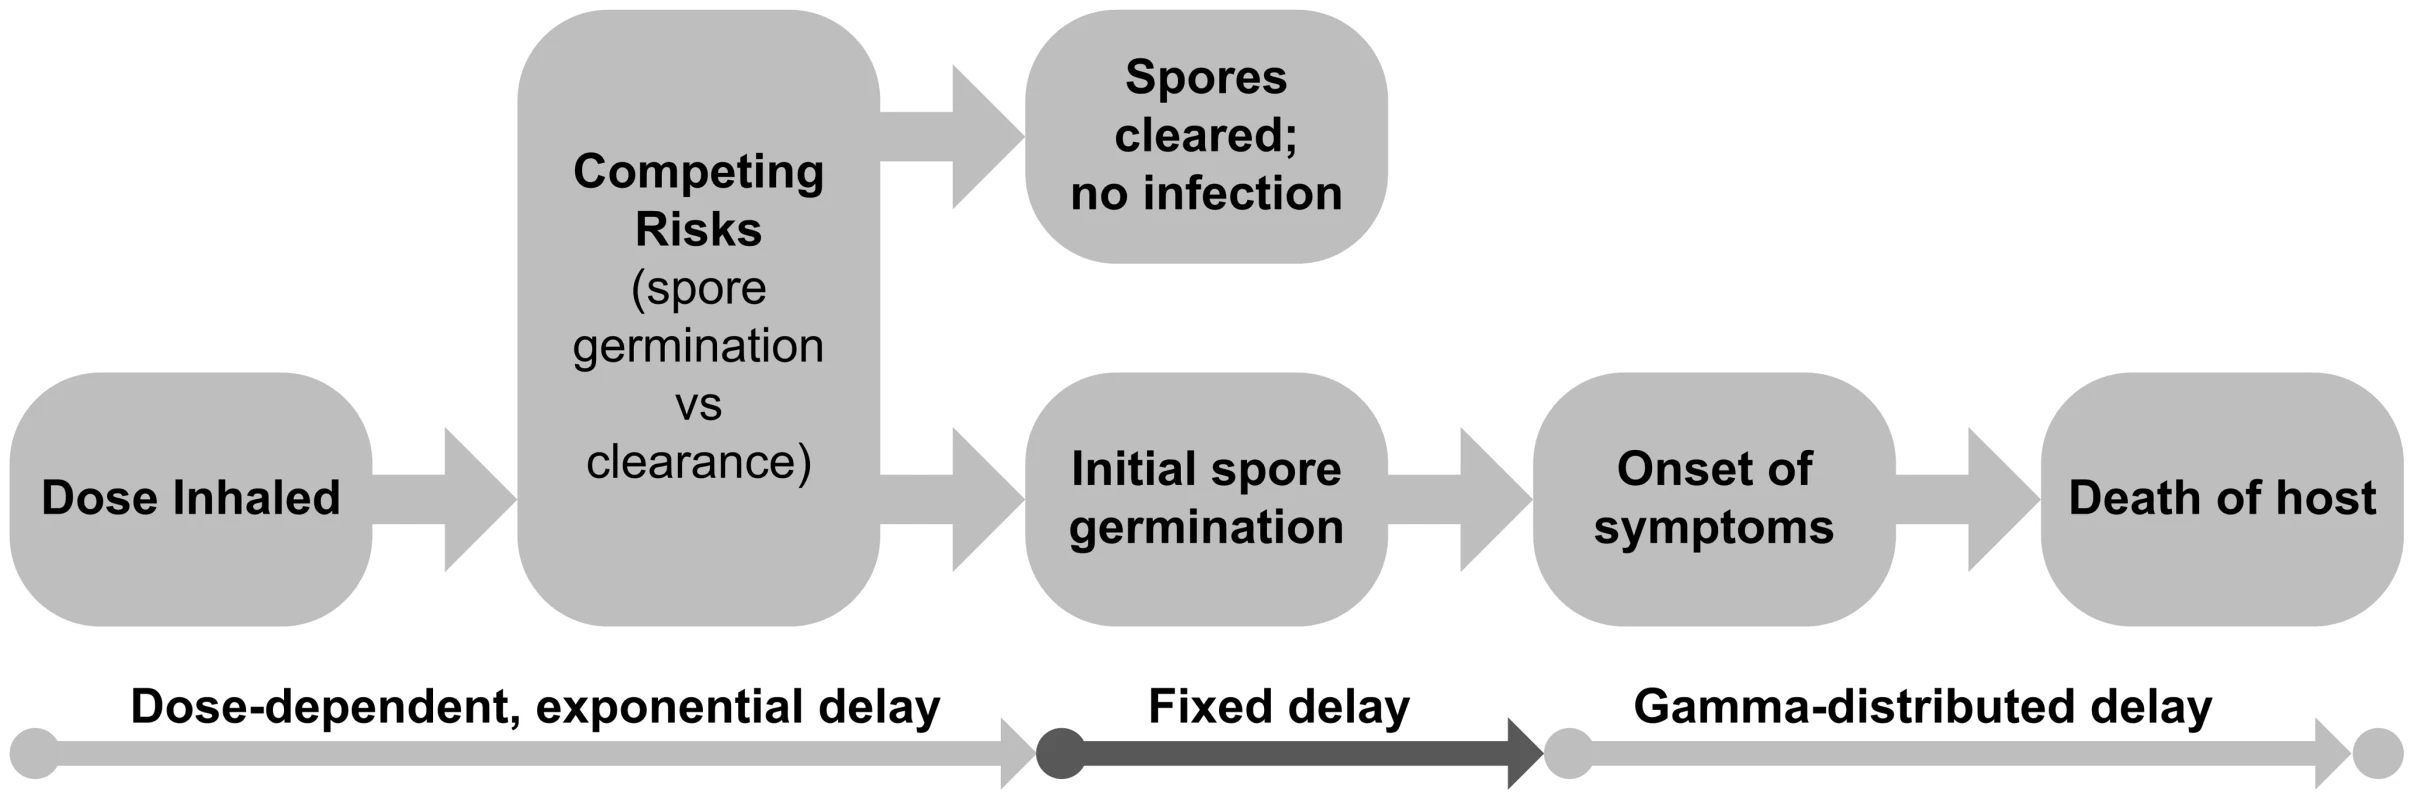 Schematic of the determination of infection and the infection timeline for anthrax.